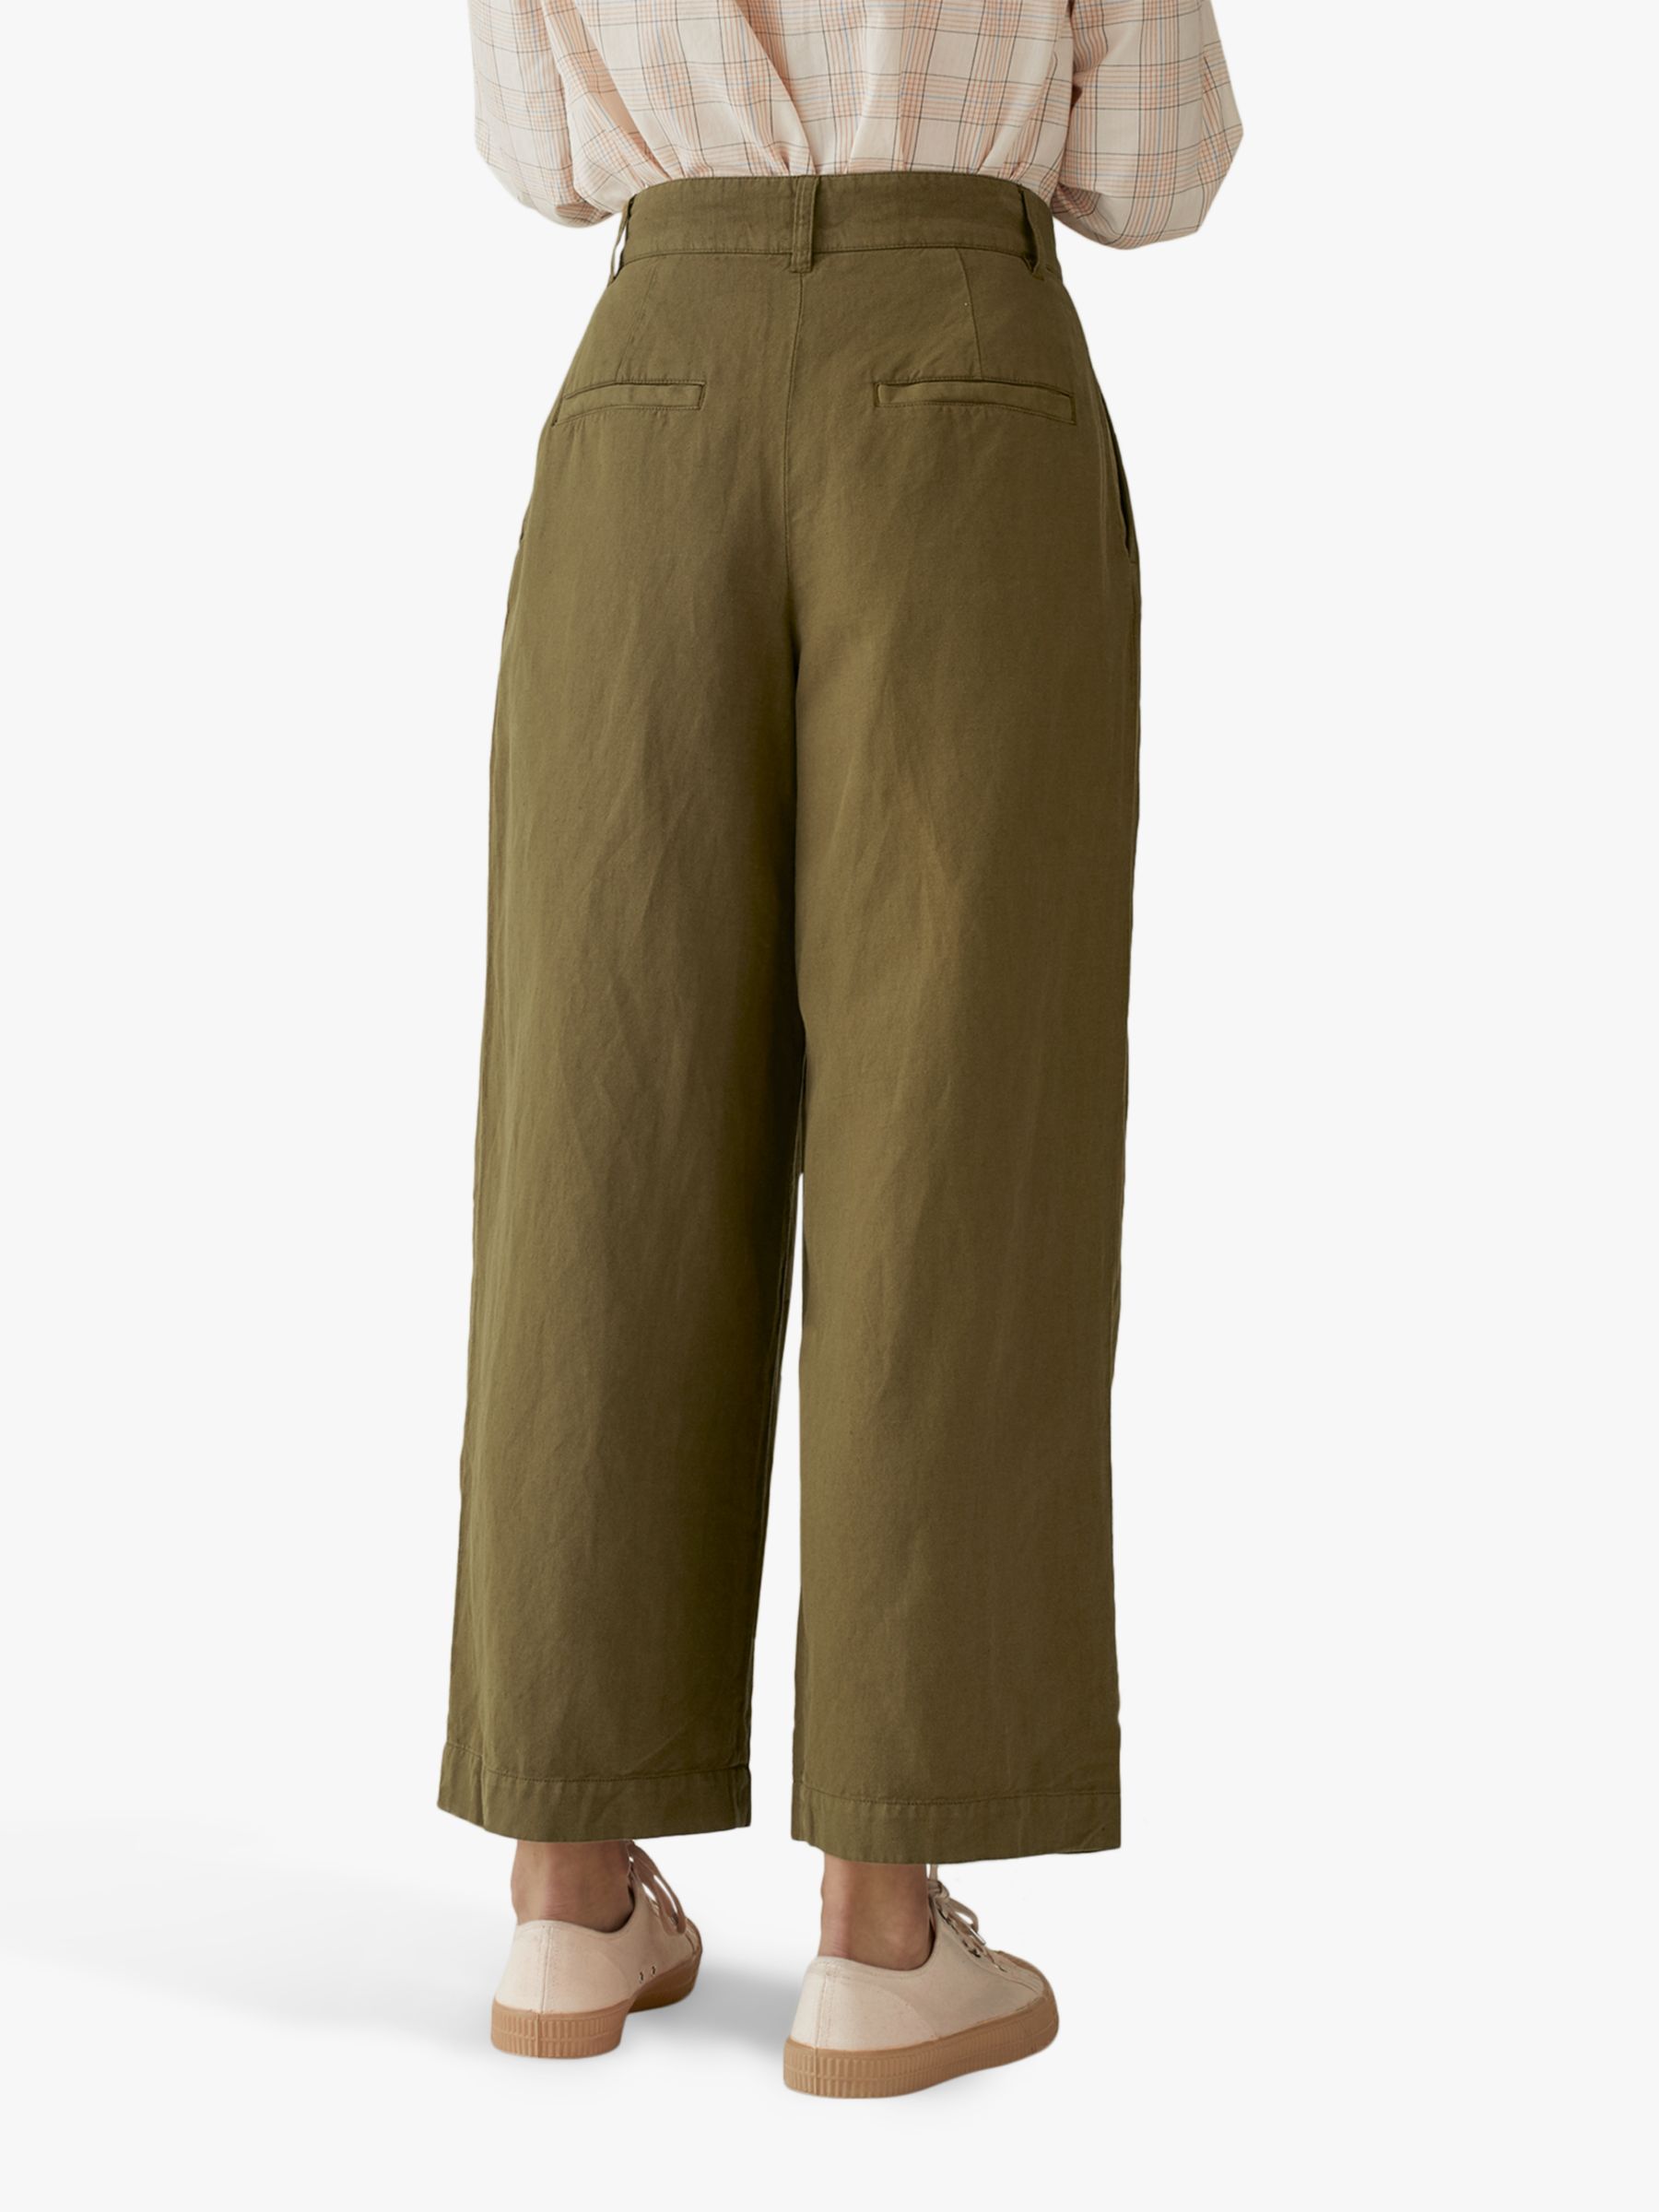 Toast Jude Cotton Linen Trousers, Olive at John Lewis & Partners